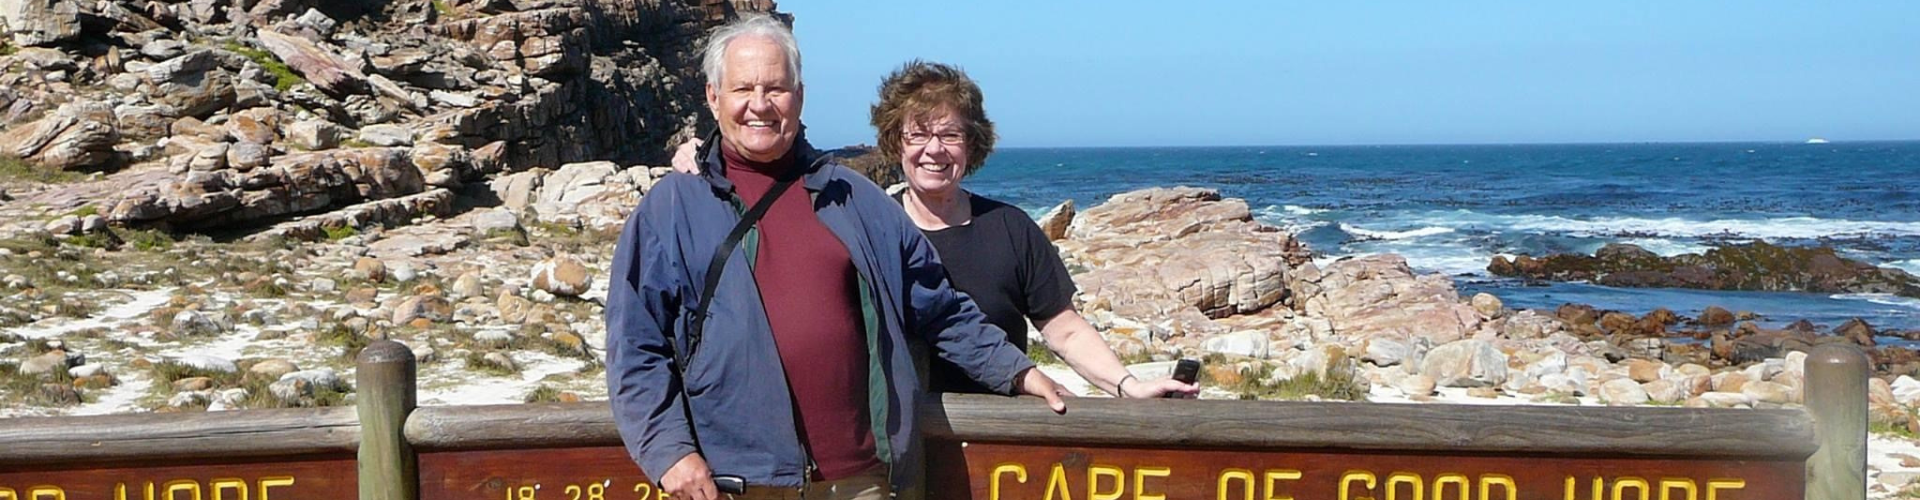 Carol Larson and her husband stand by a sign at Cape Cod